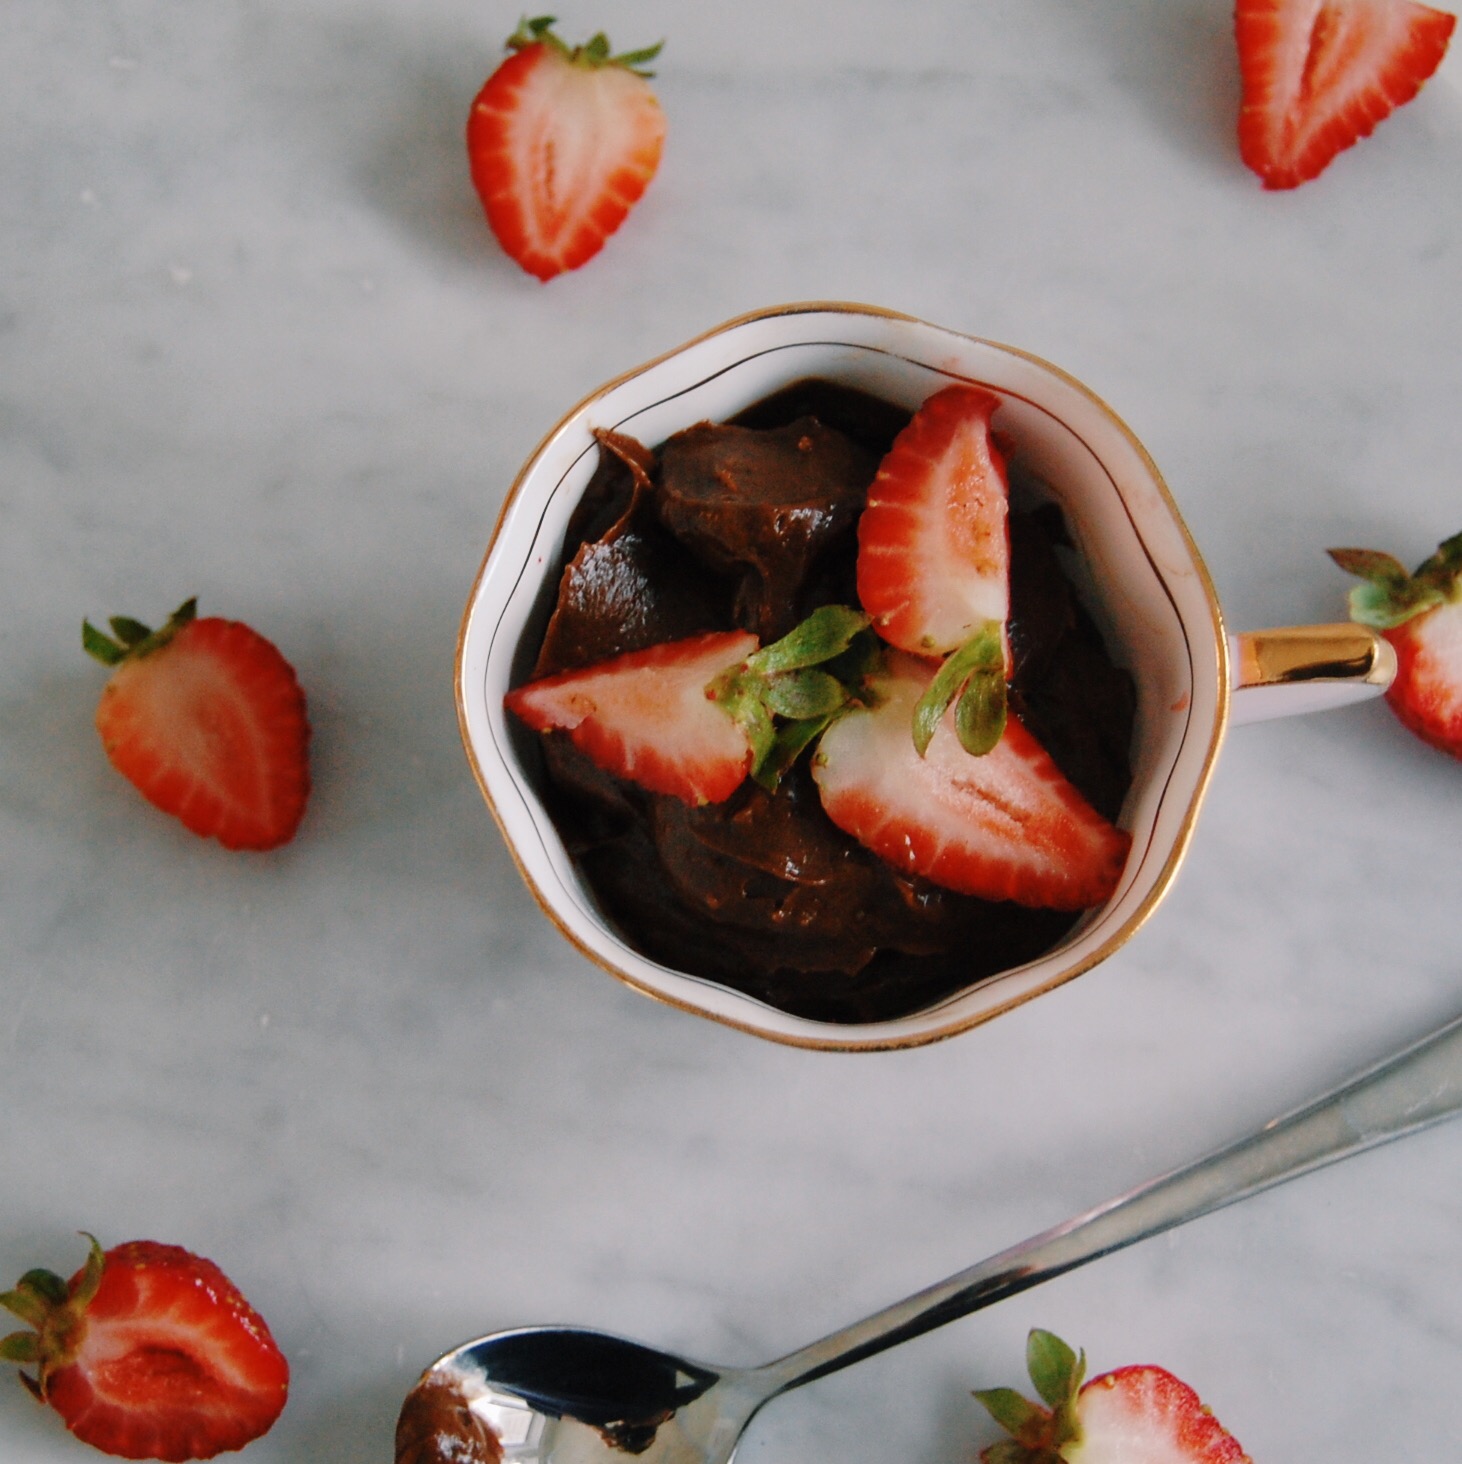 Avocado Chocolate Mousse with Strawberries